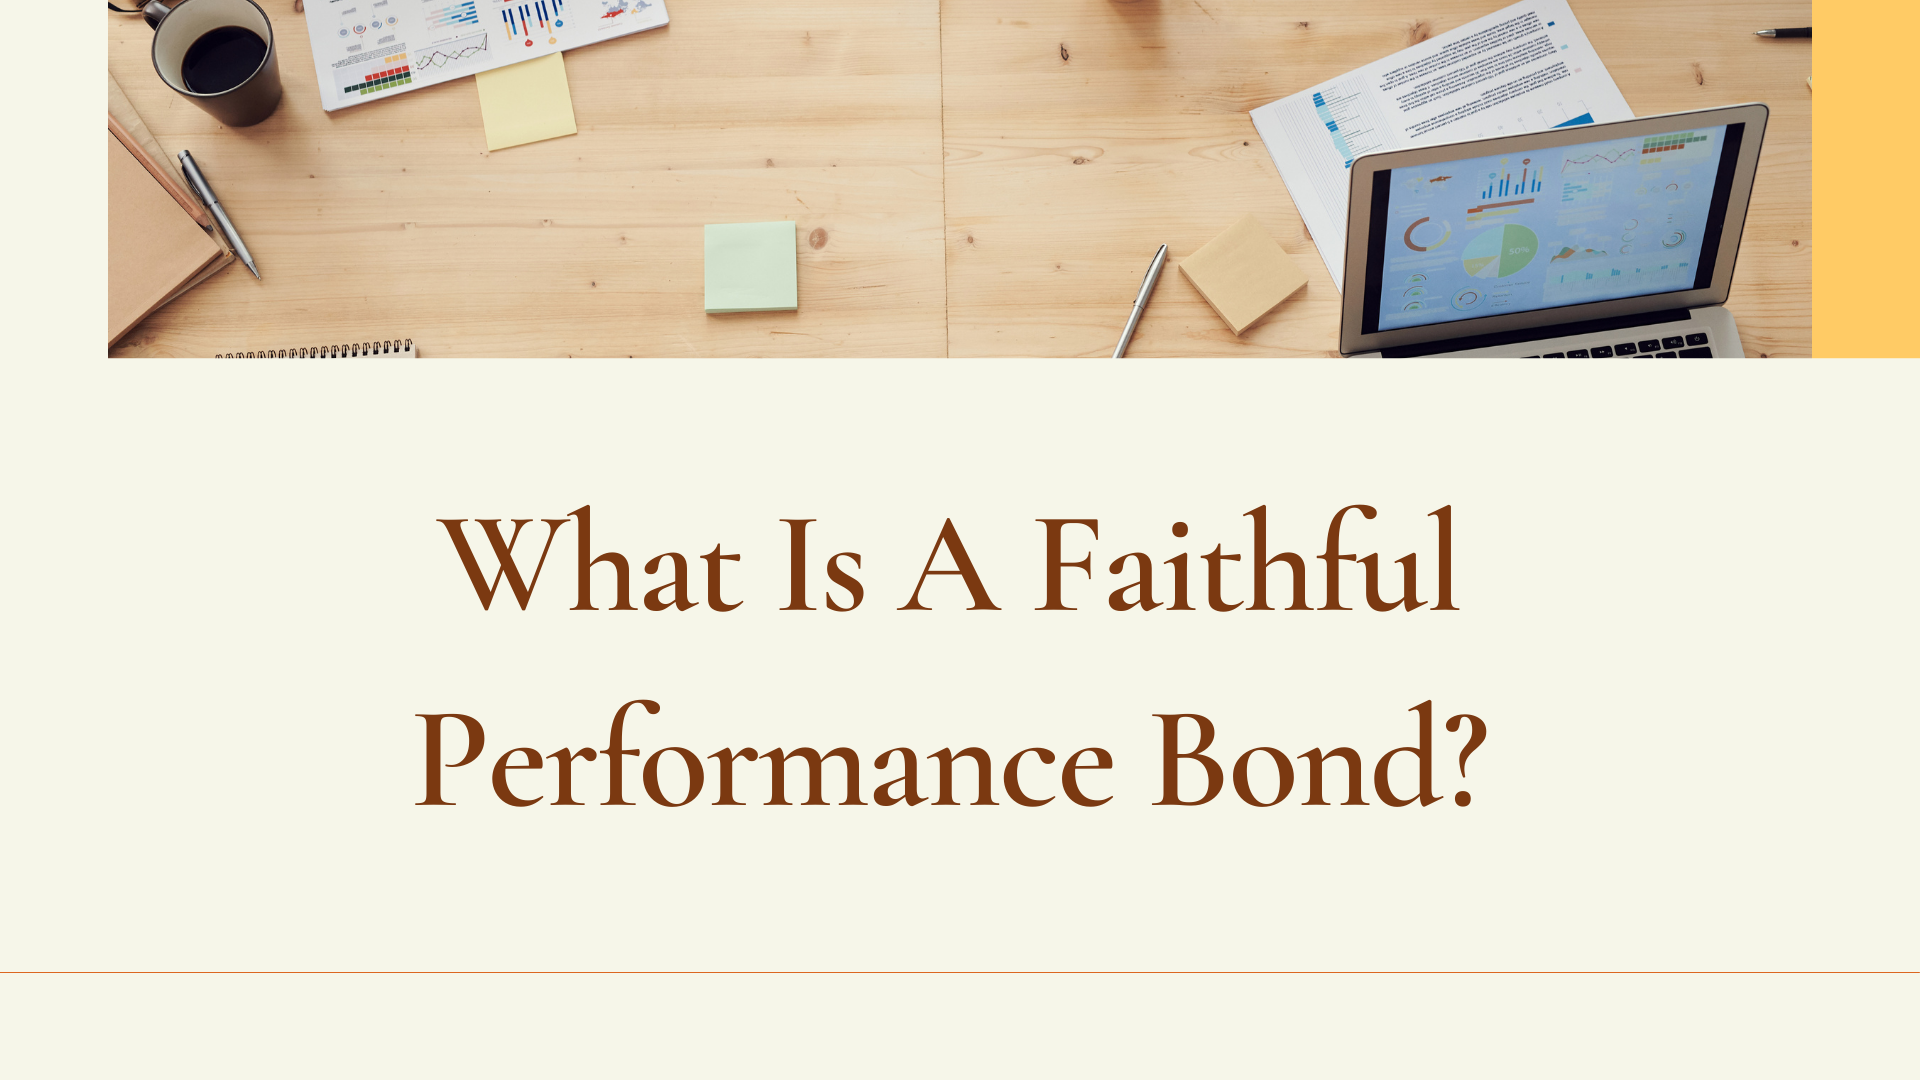 performance bond - What is a faithful performance bond - working